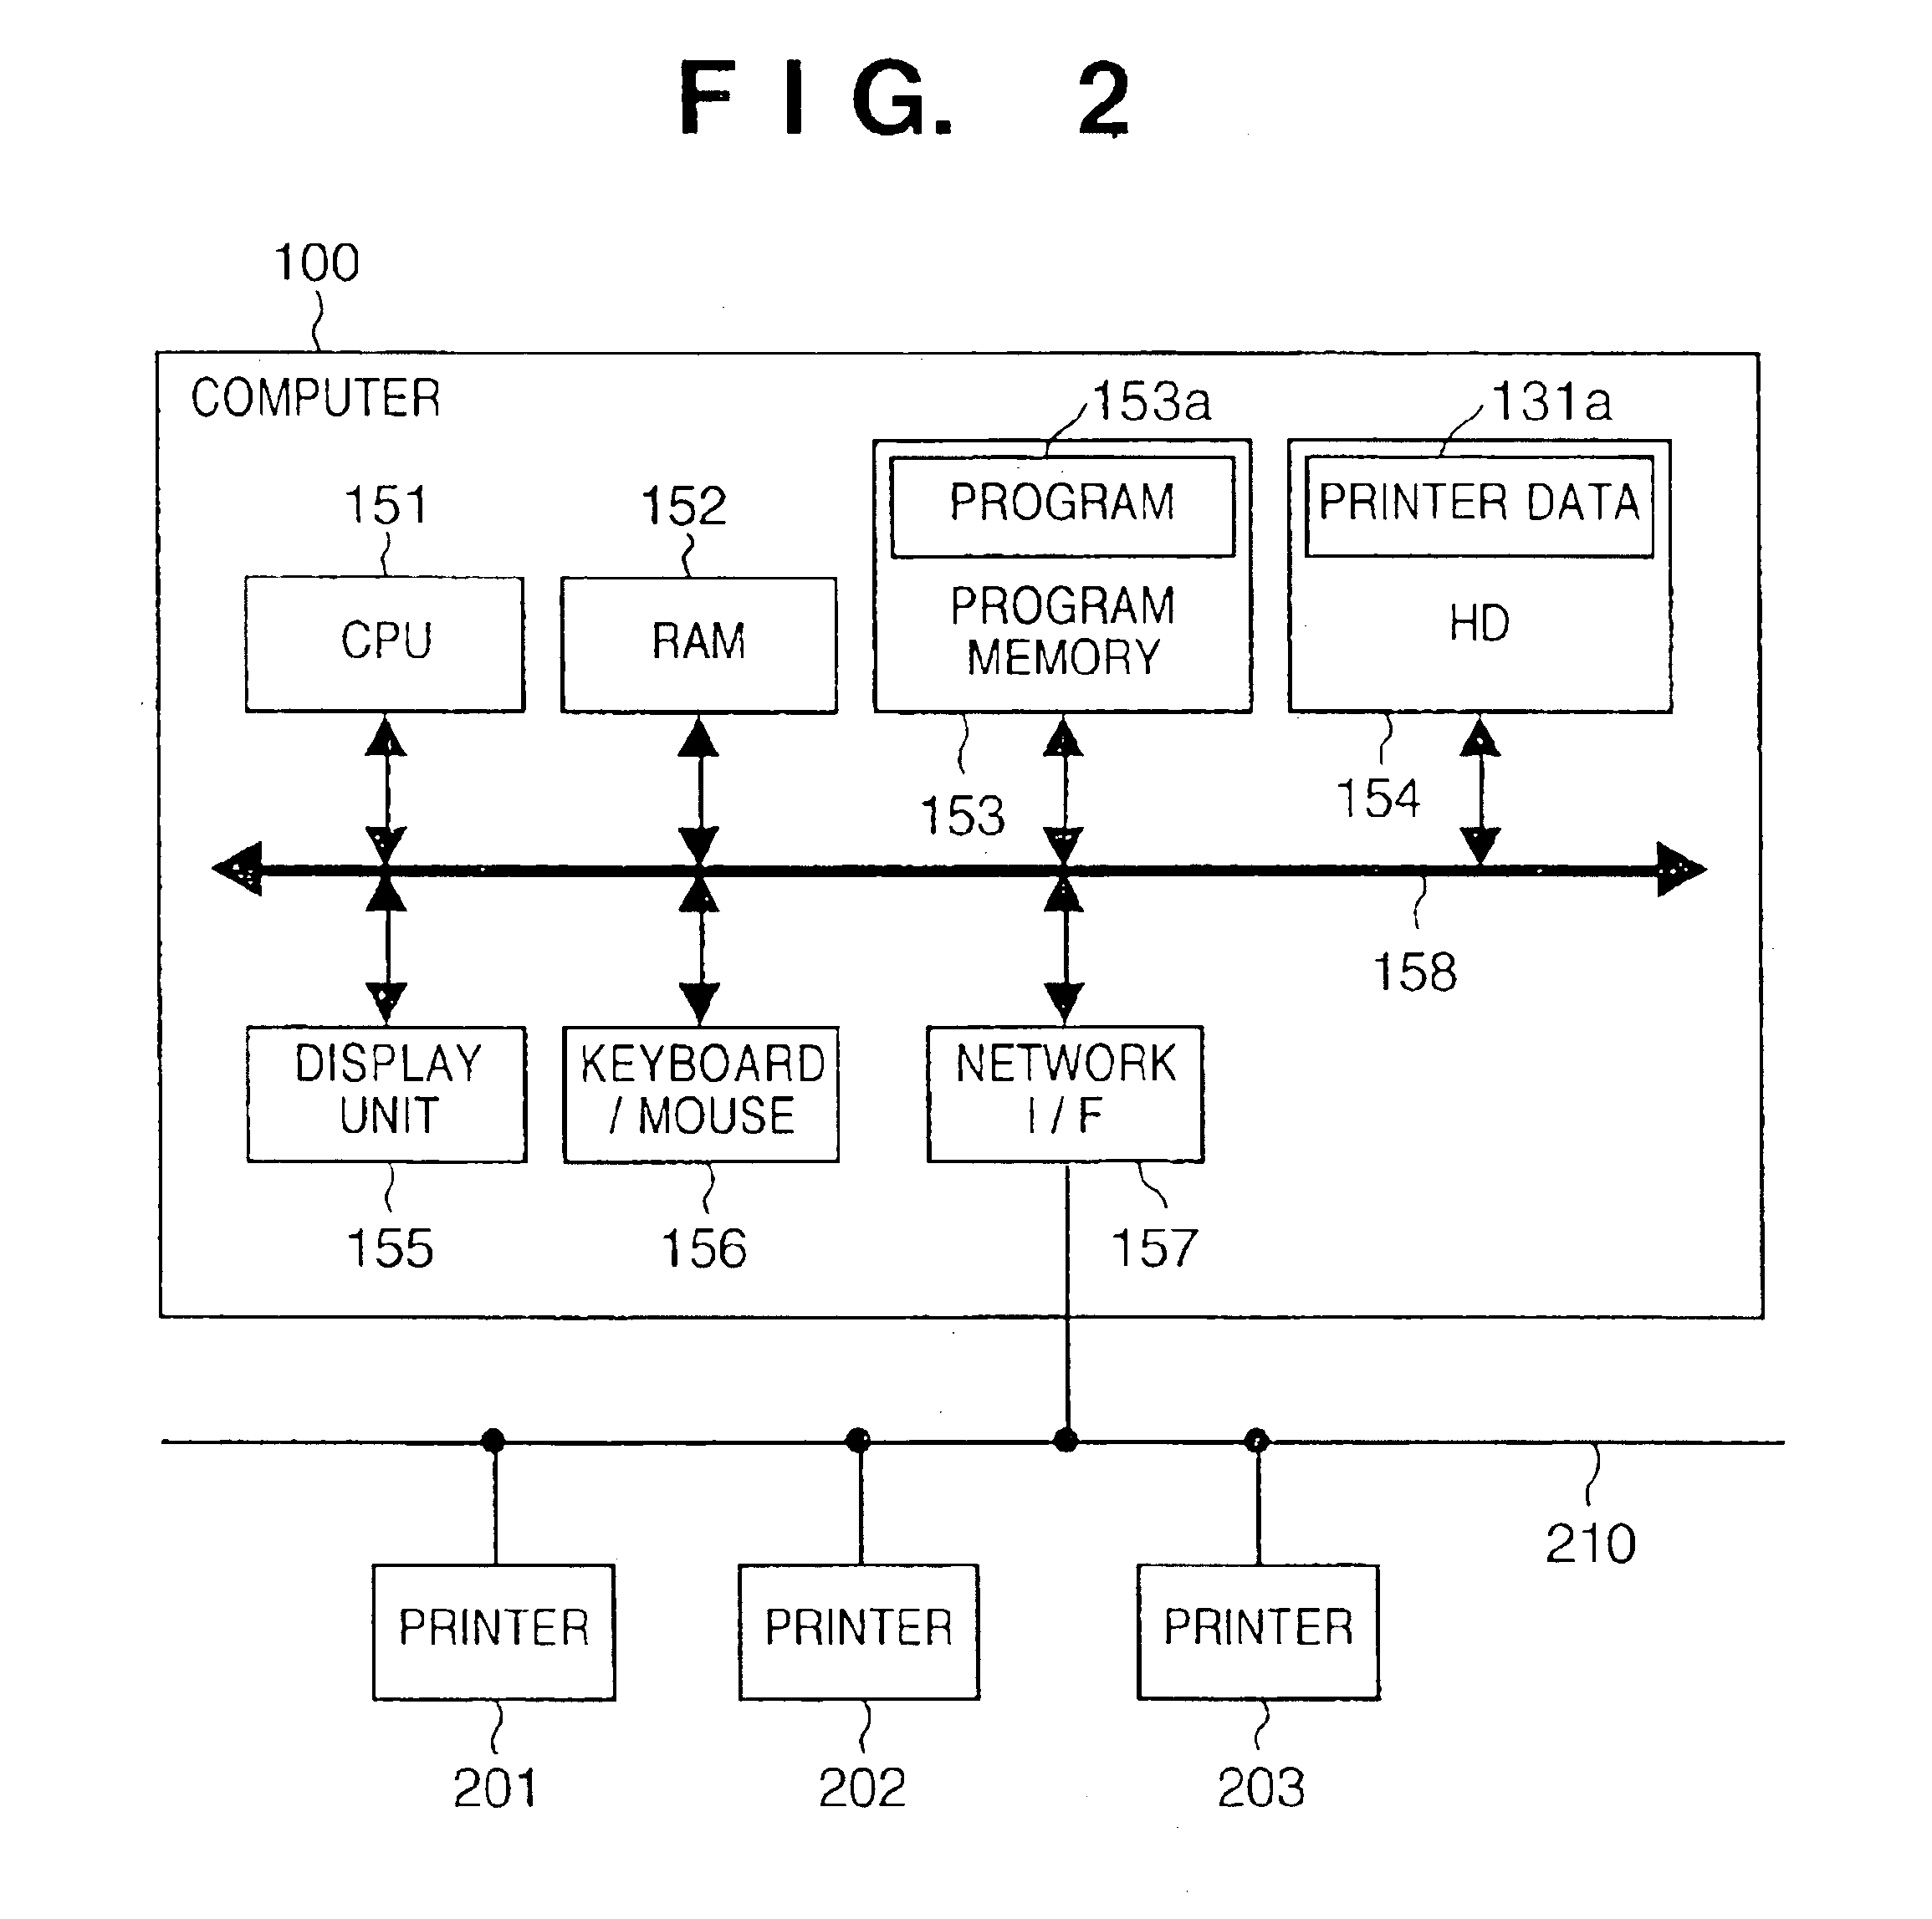 Designating an image processing apparatus based on limited selection conditions